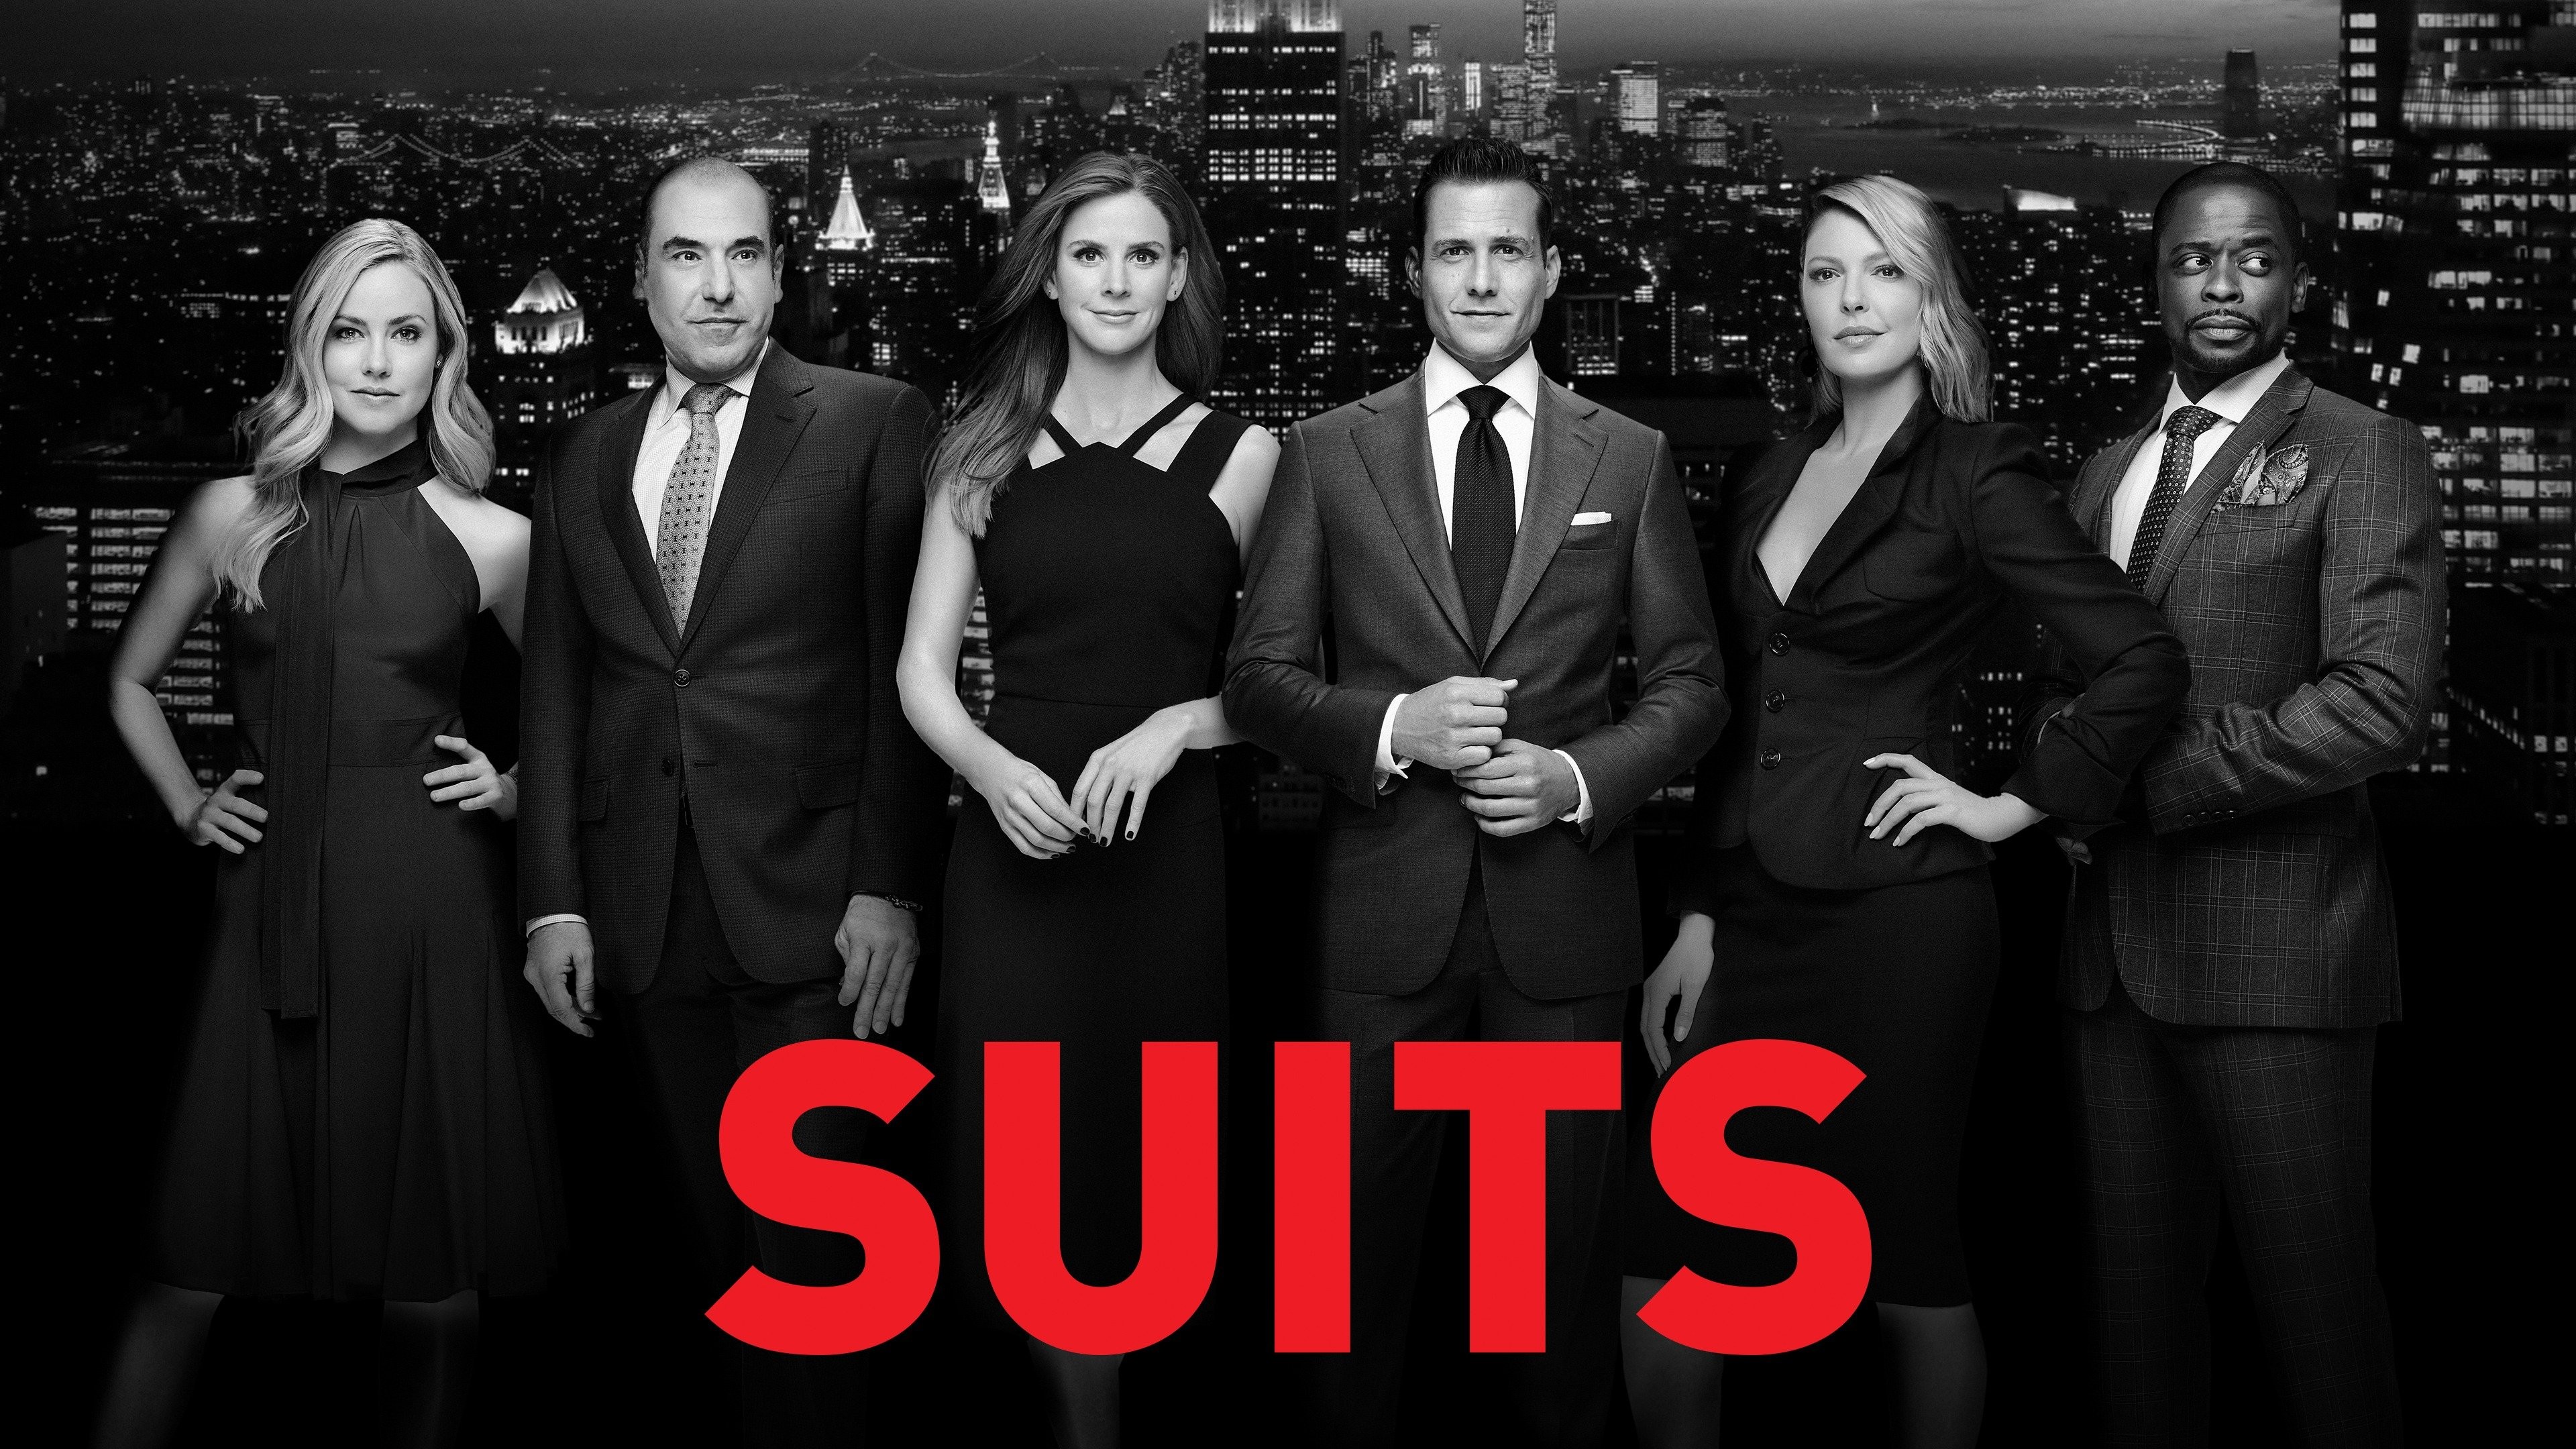 5 Fictional Characters Who Suit Up Well - Blog @ The Suit Concierge